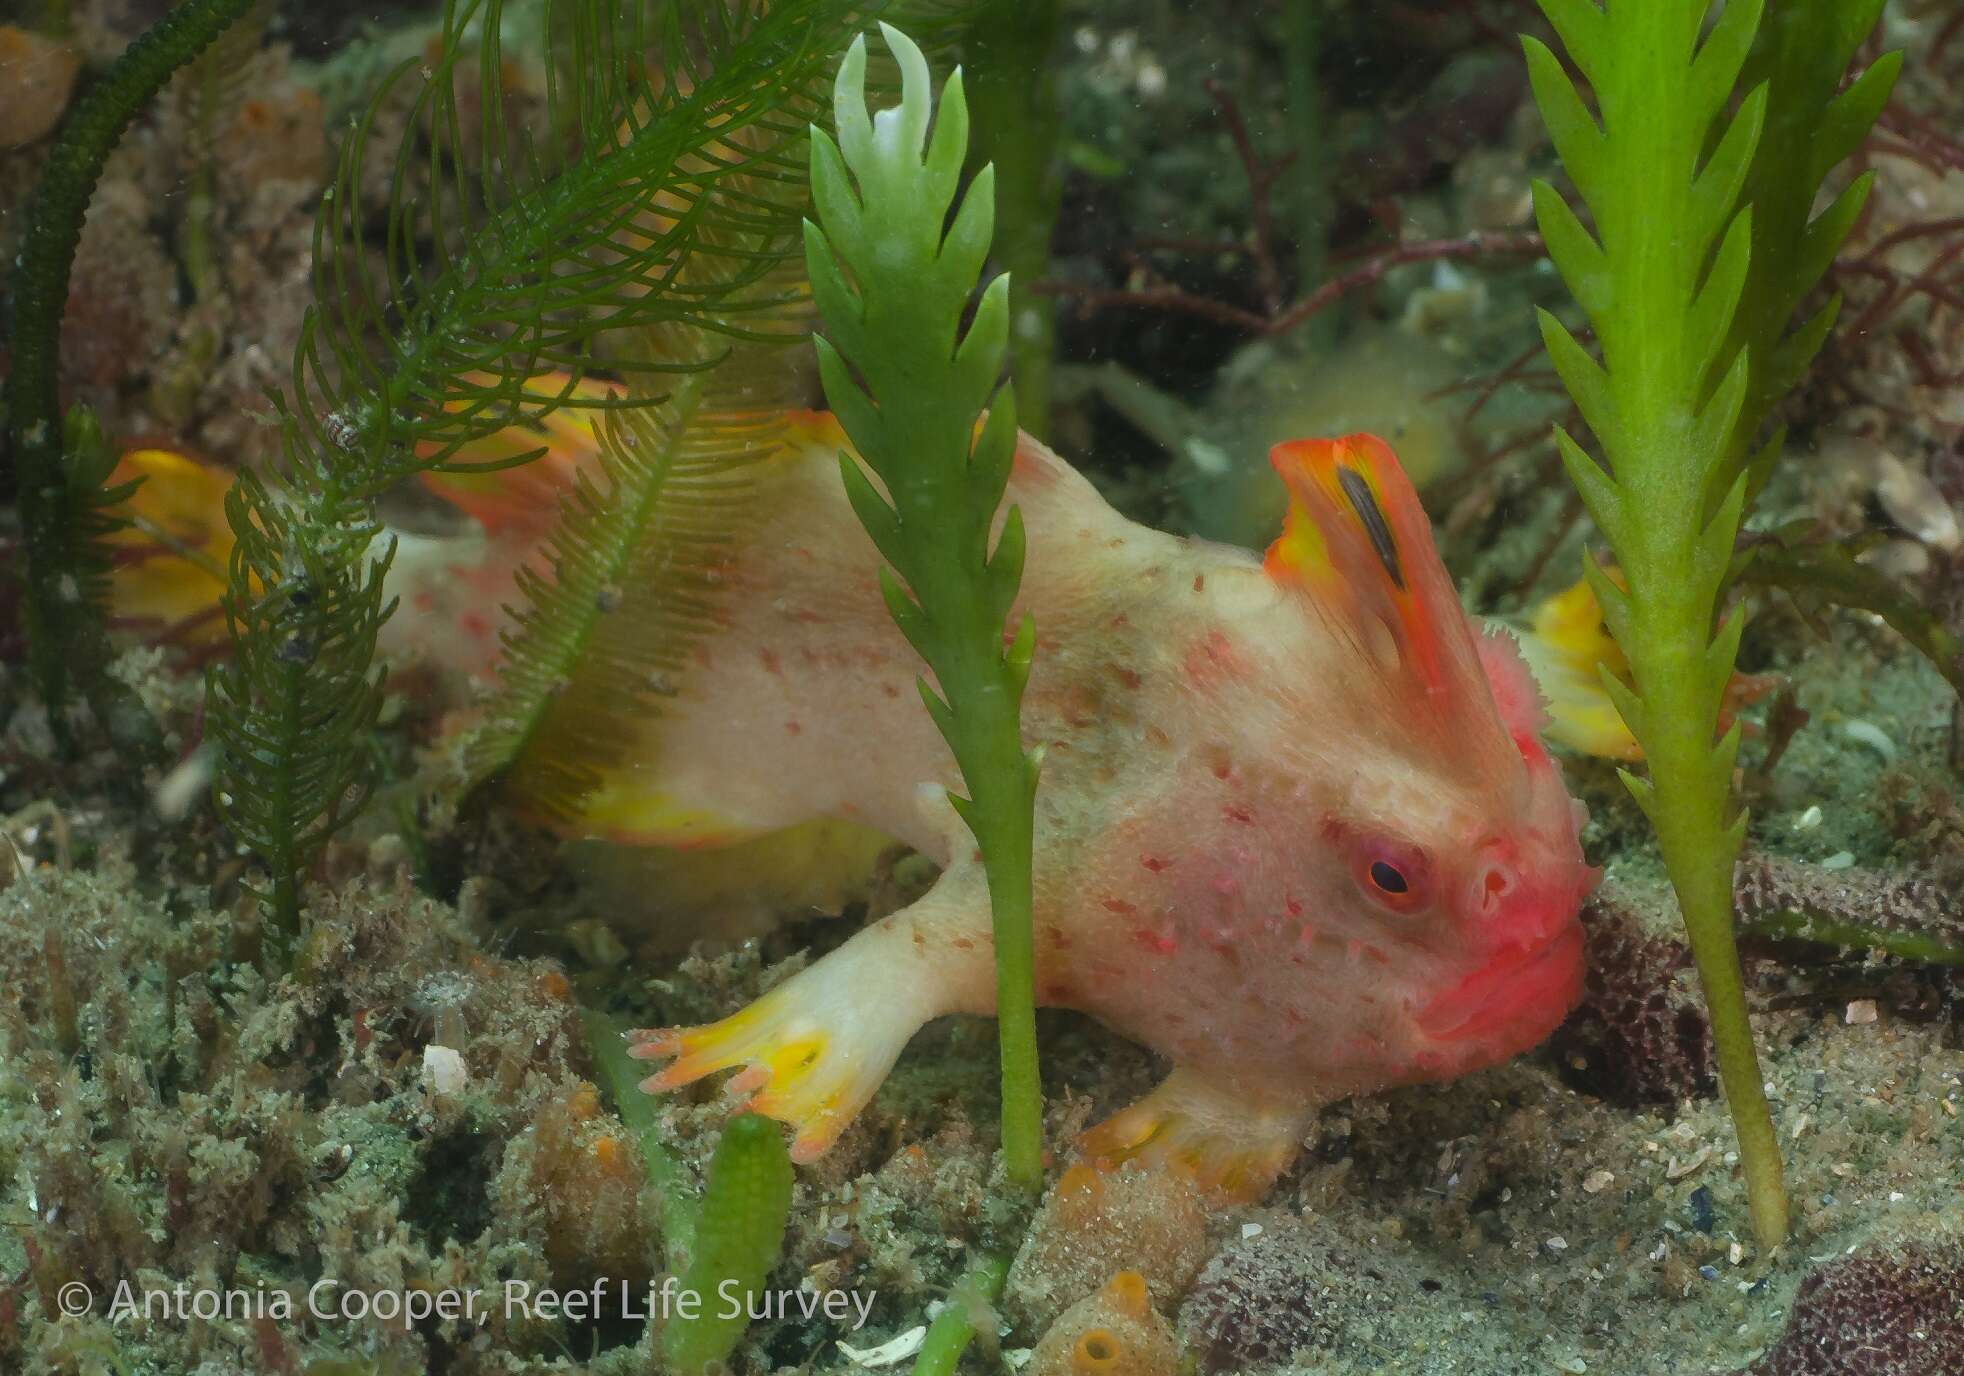 Red handfish discovered by divers off the coast of Tasmania